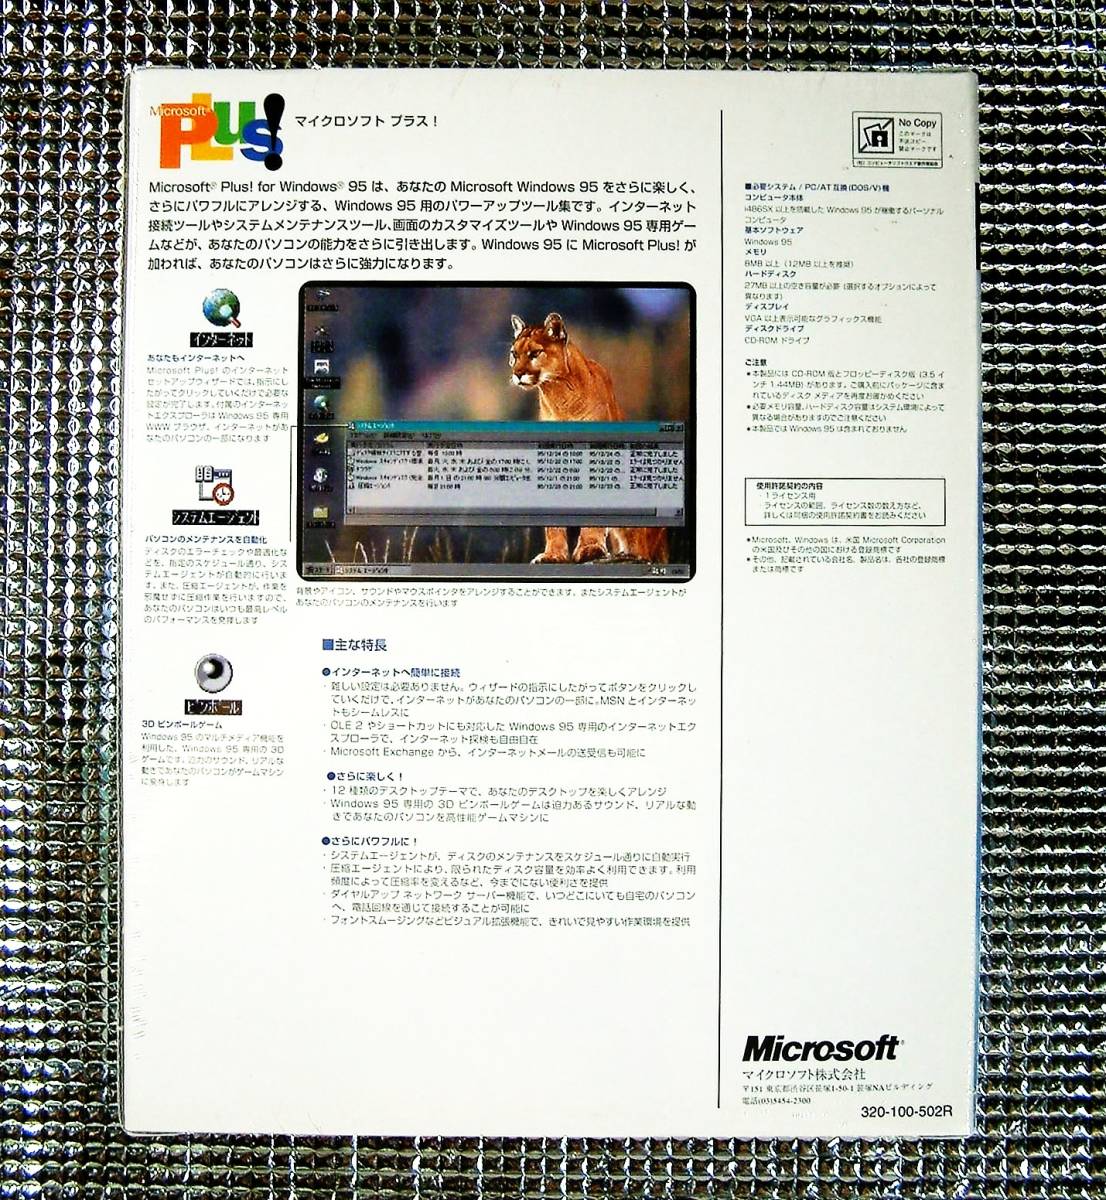 【4137】Microsoft Plus! for Windows 95 PC/AT互換機(DOS/V)用 CD-ROM版 新品 マイクロソフト プラス パワーアップキット 4988648021532_画像2